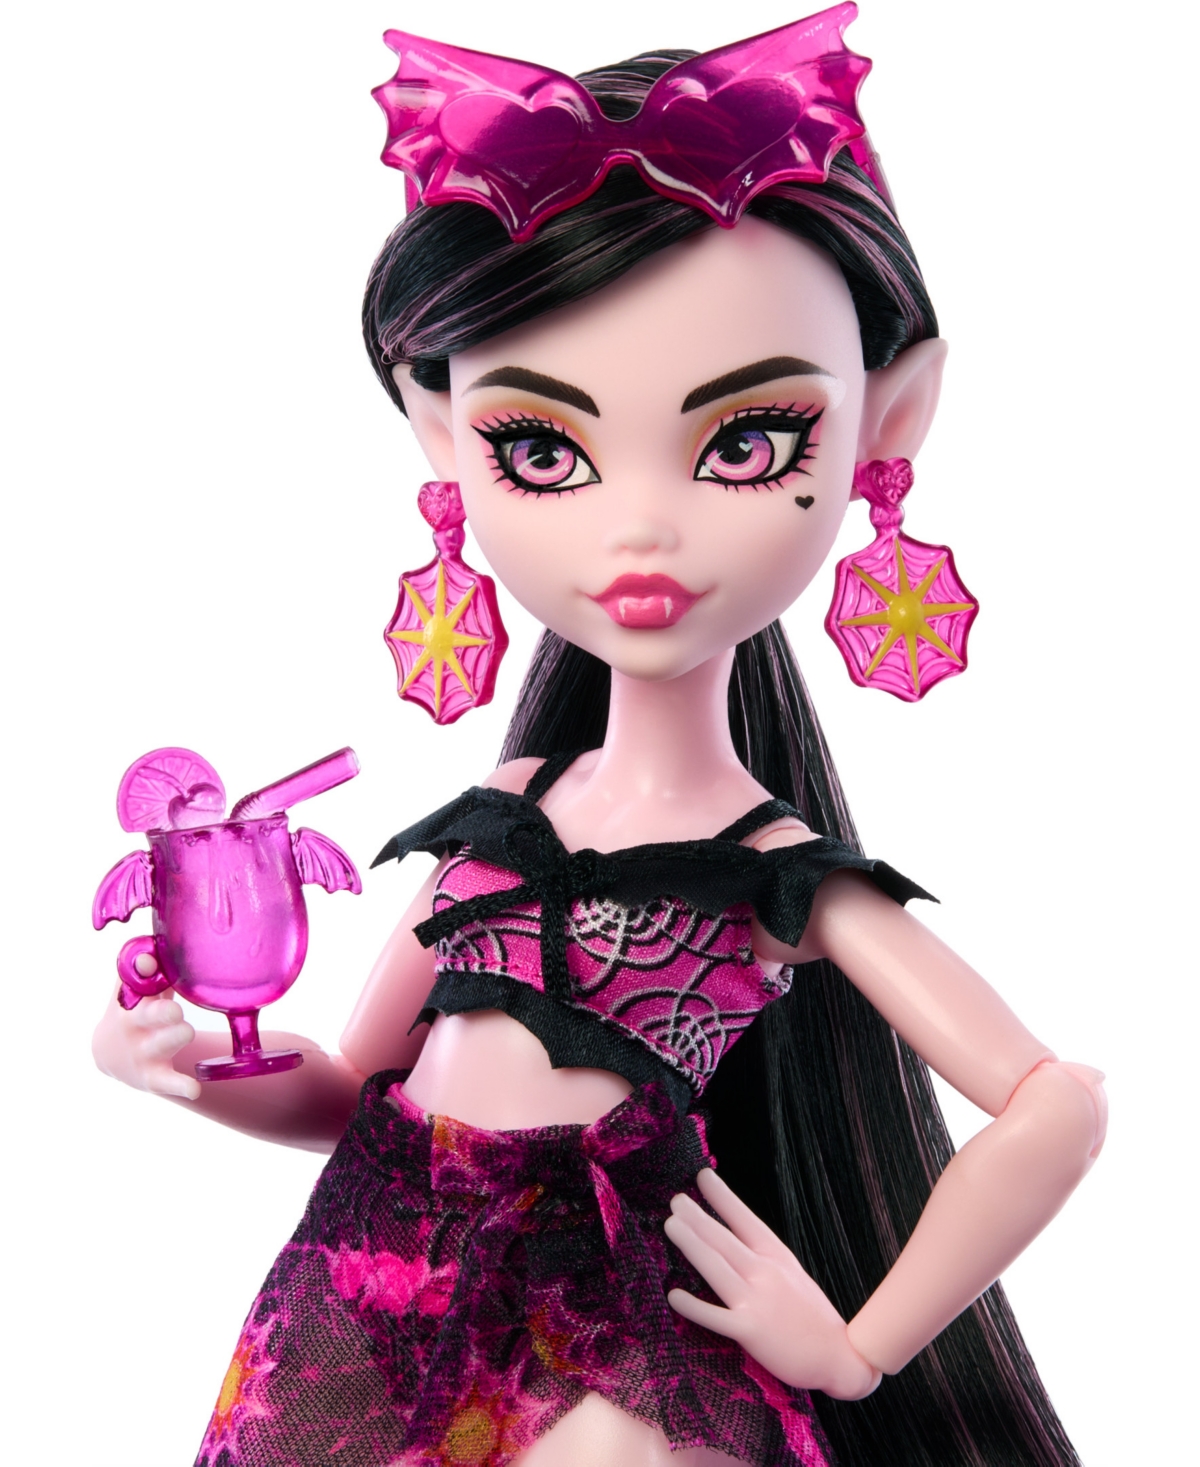 Shop Monster High Scare-adise Island Draculaura Fashion Doll With Swimsuit Accessories In No Color